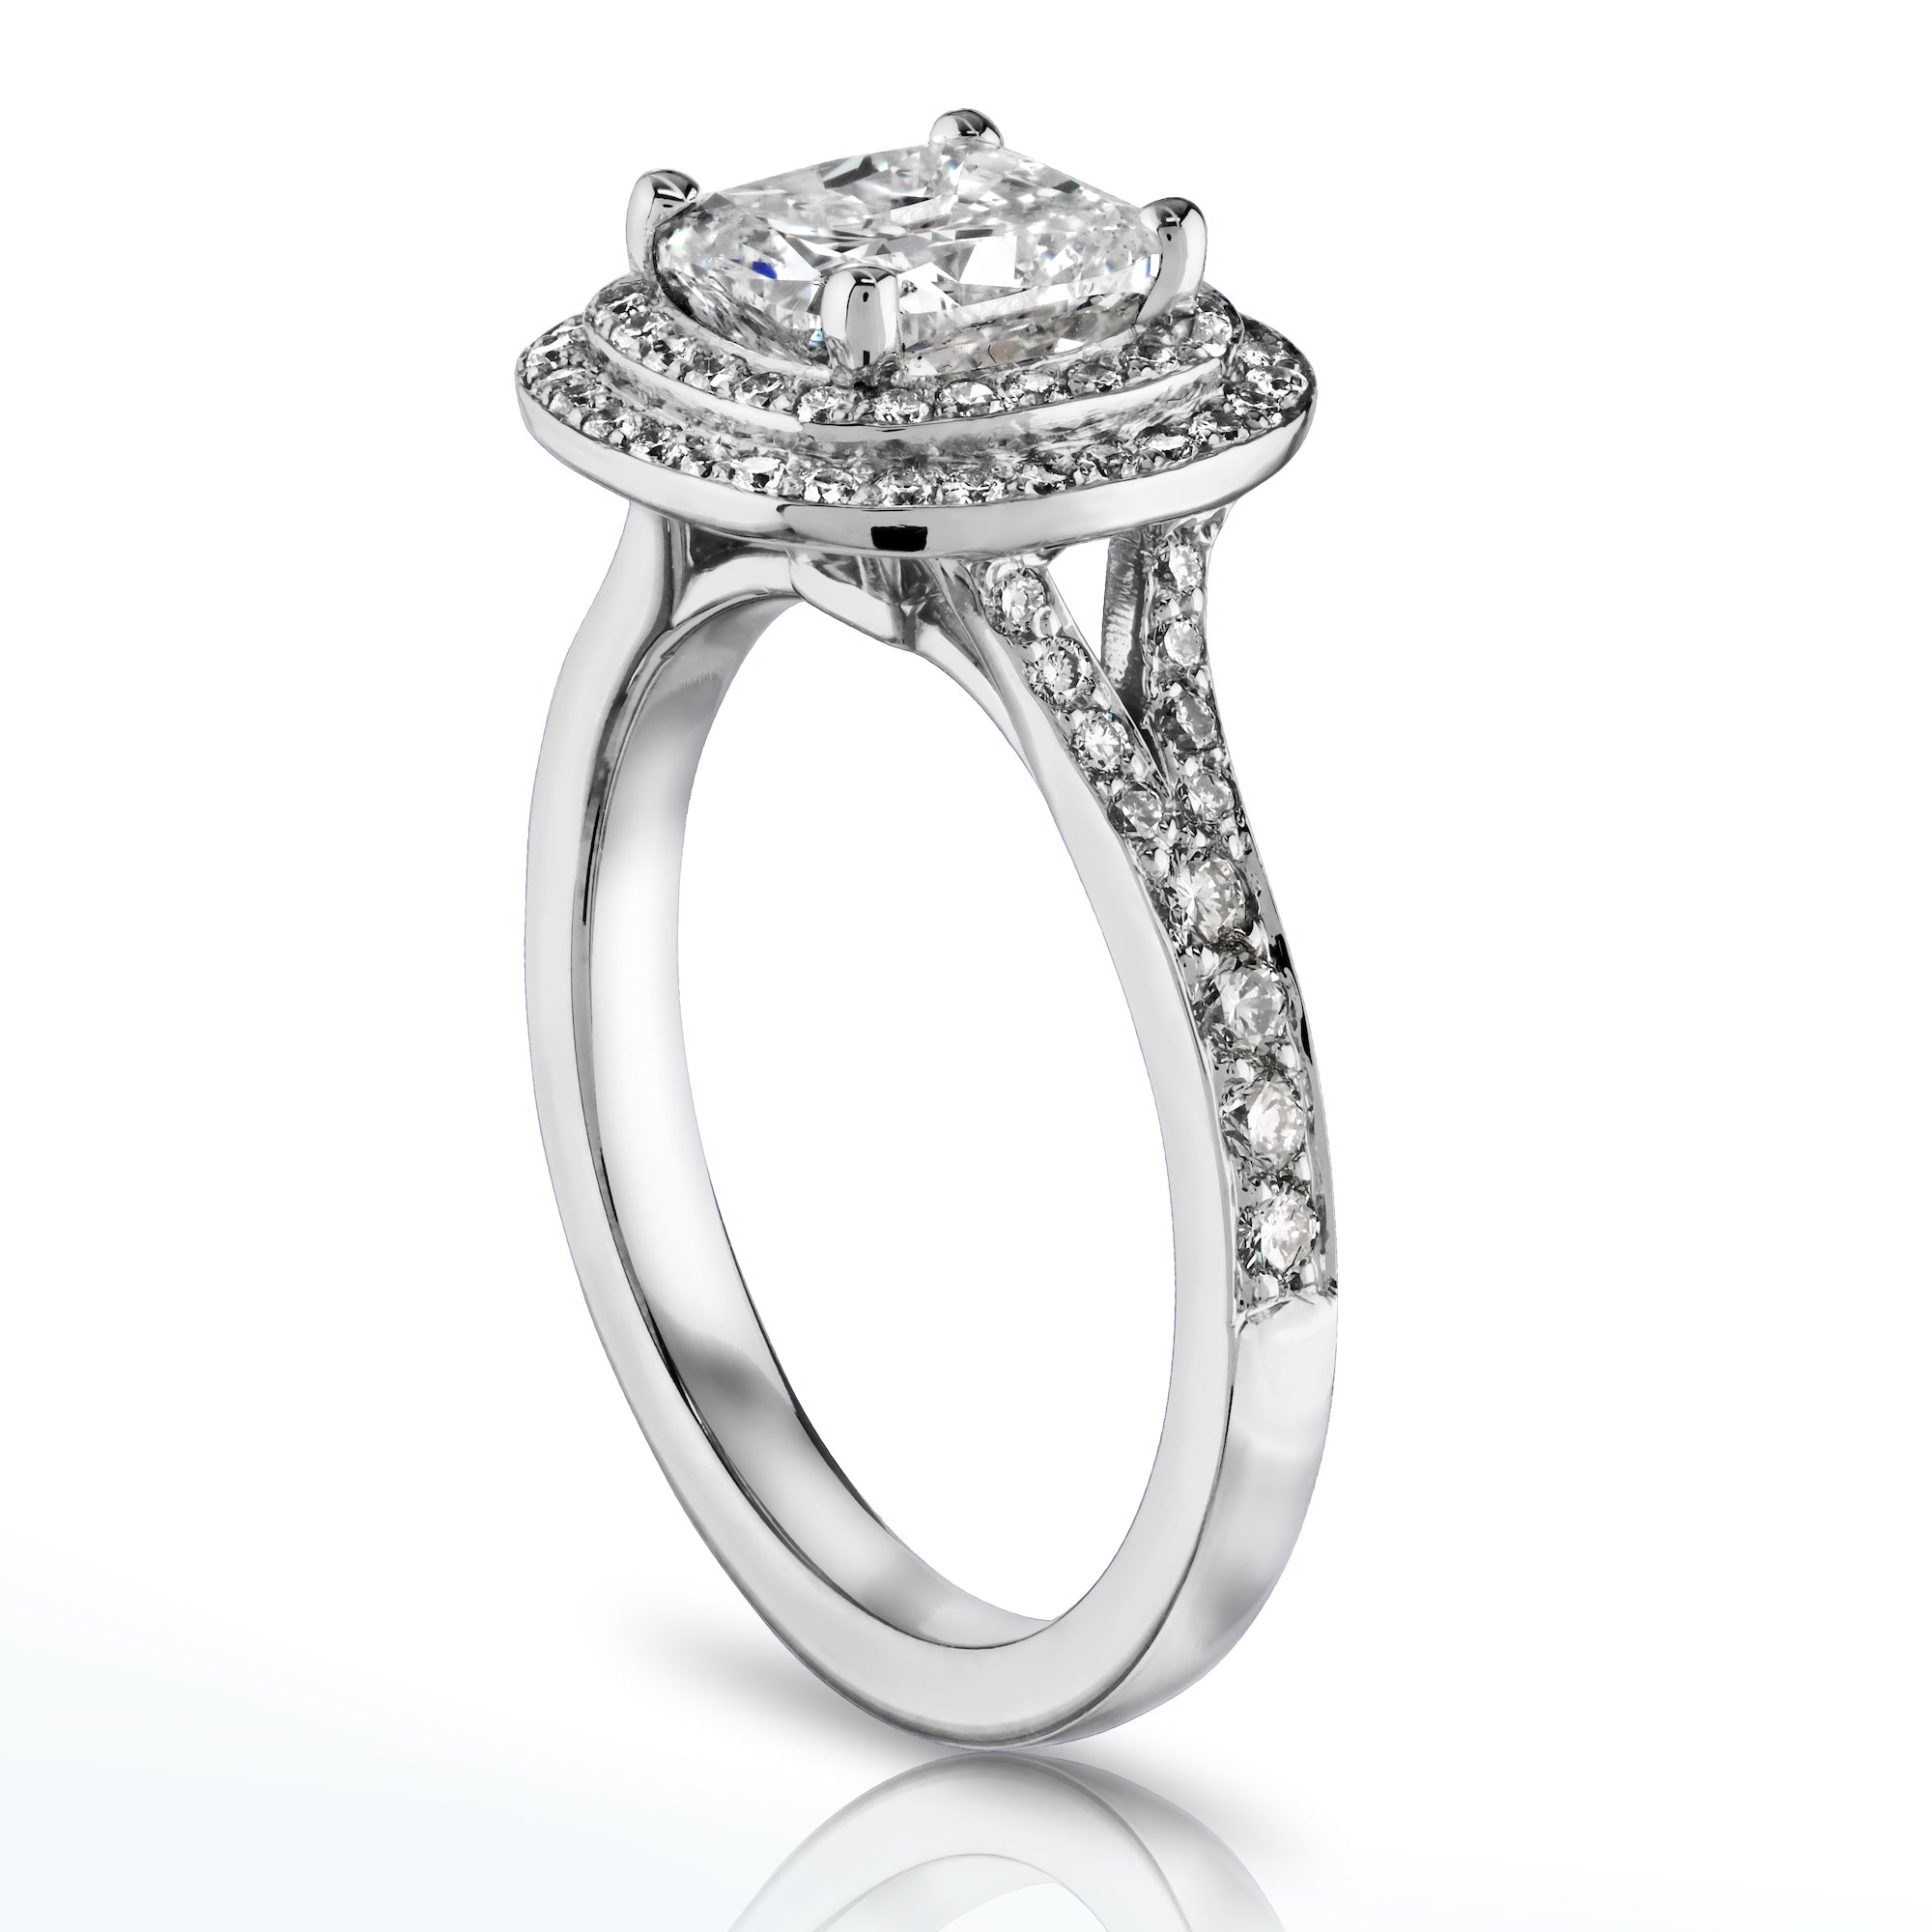 Cushion Cut Diamond Ring with Double Halo and Pave, 1.59 CT - Rings - Leviev Diamonds